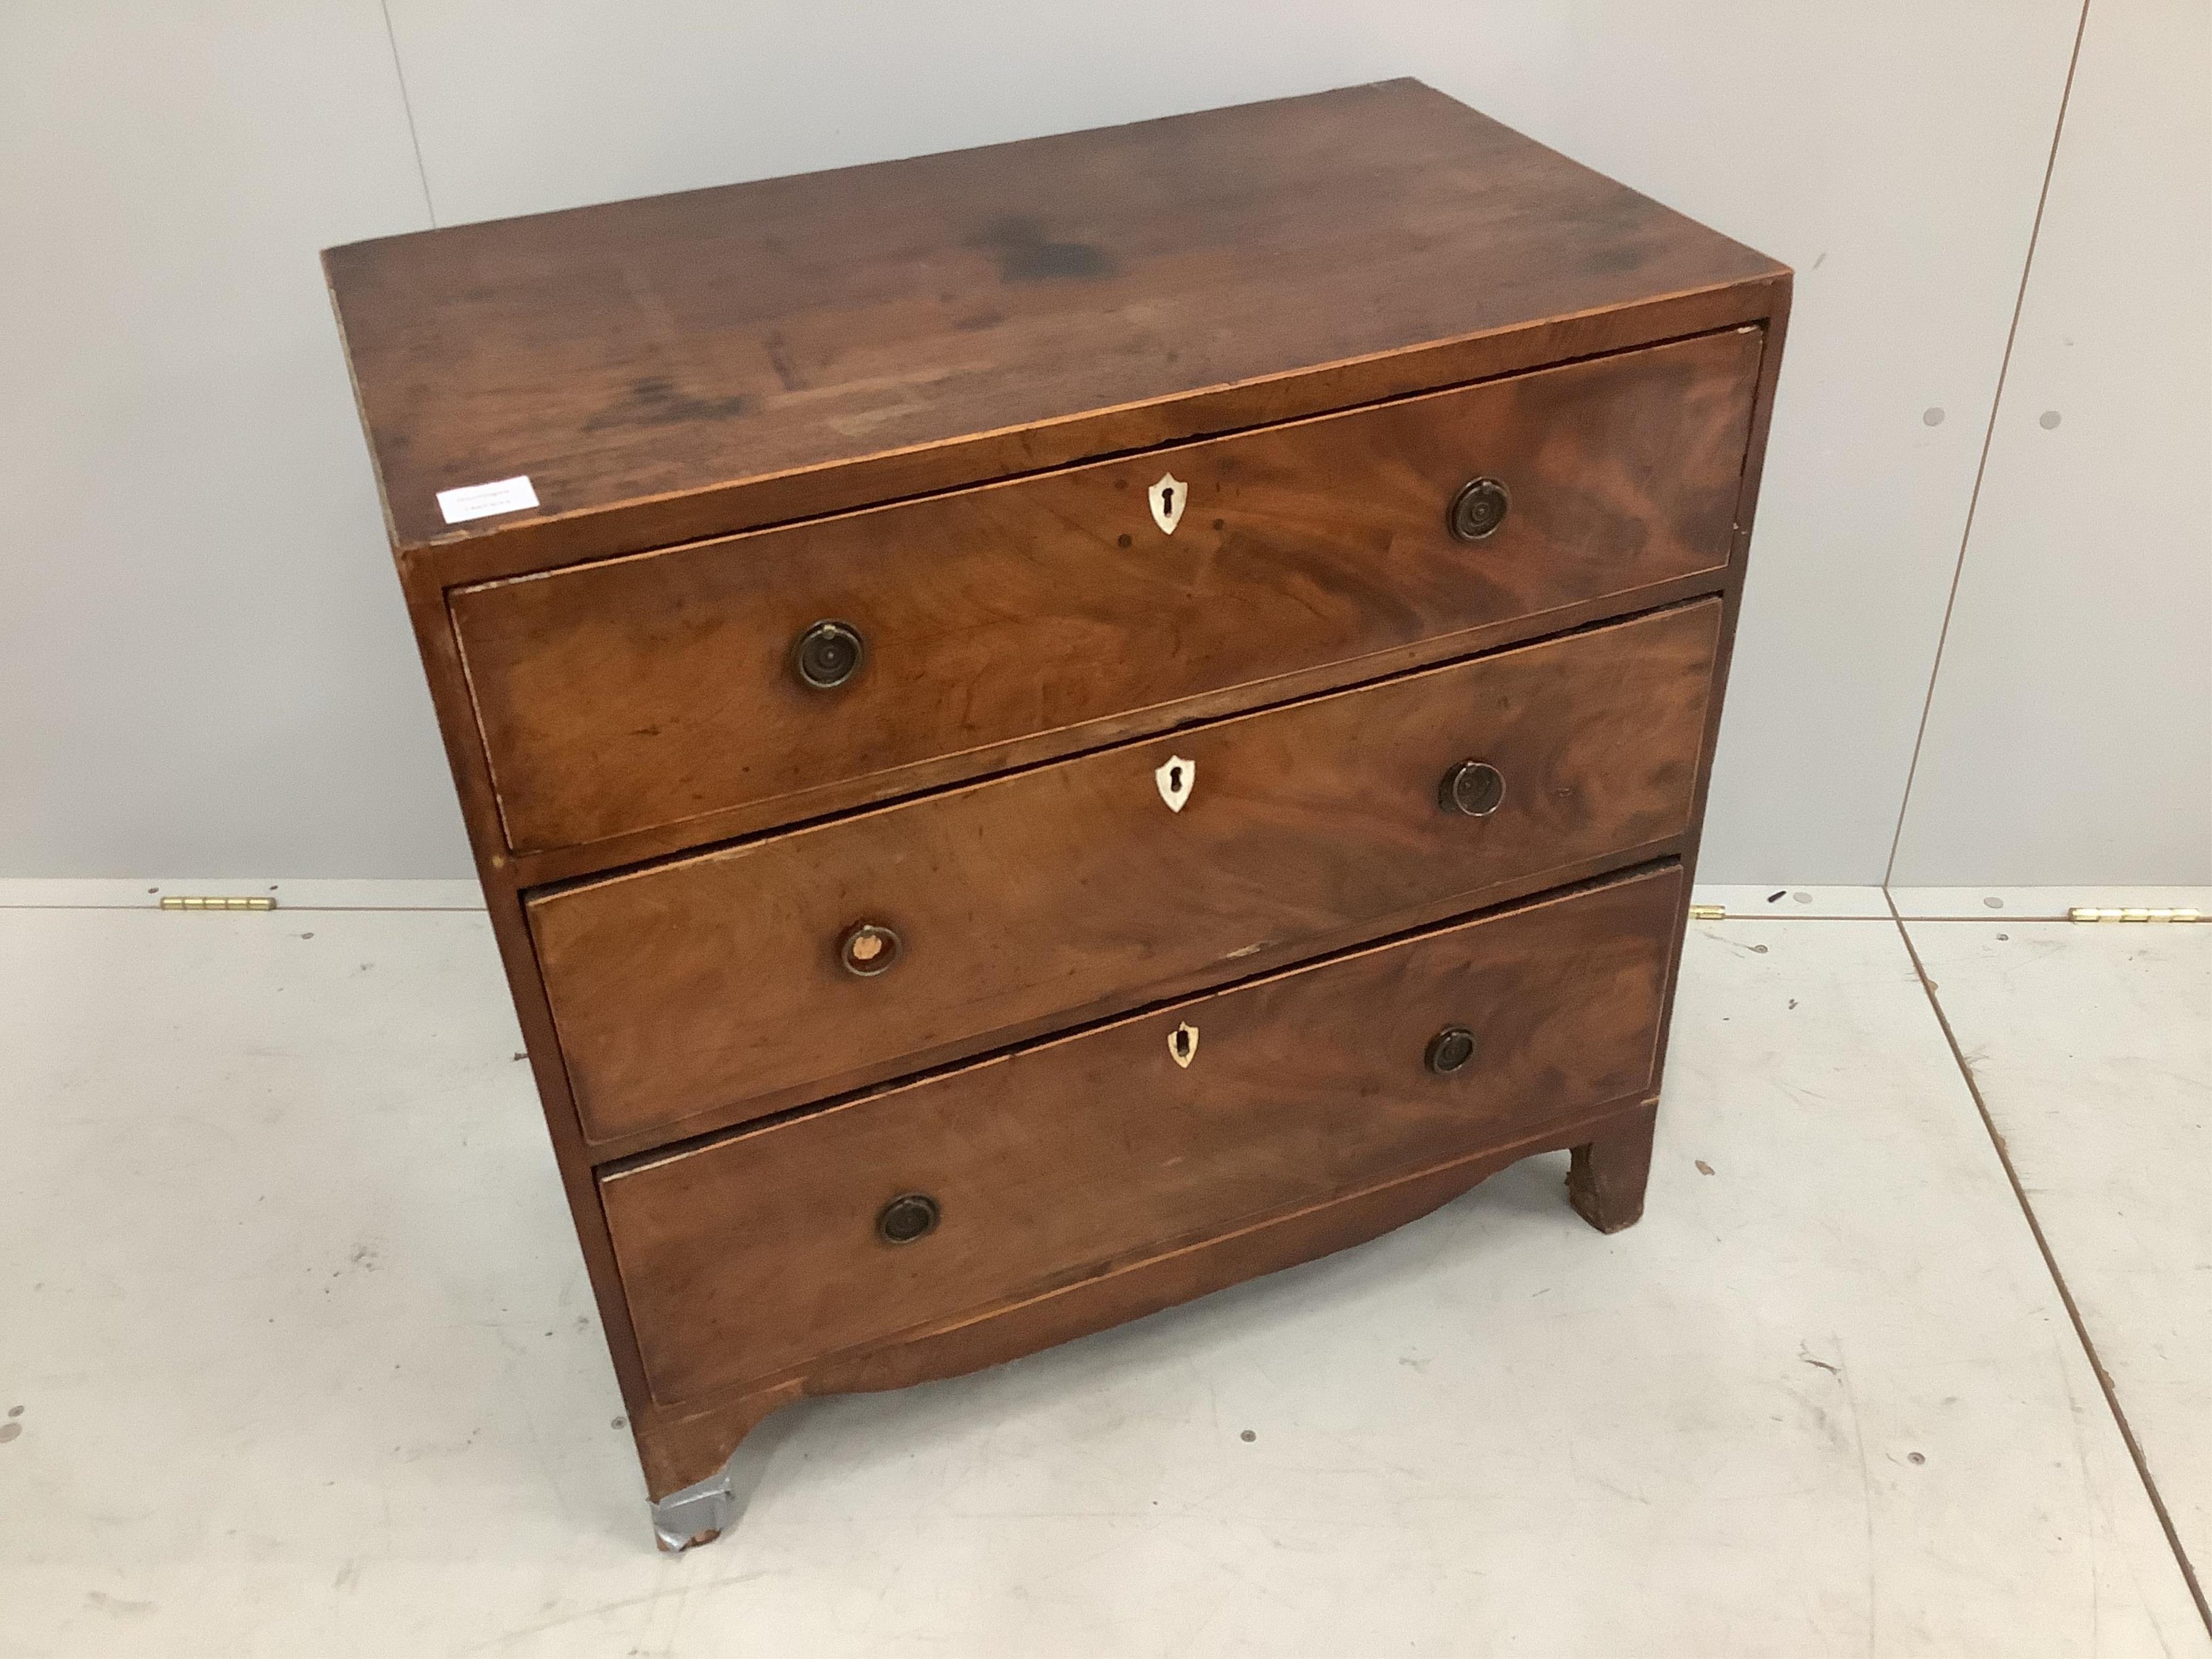 A small George III mahogany chest of three drawers, width 74cm, depth 42cm, height 73cm. Condition - poor